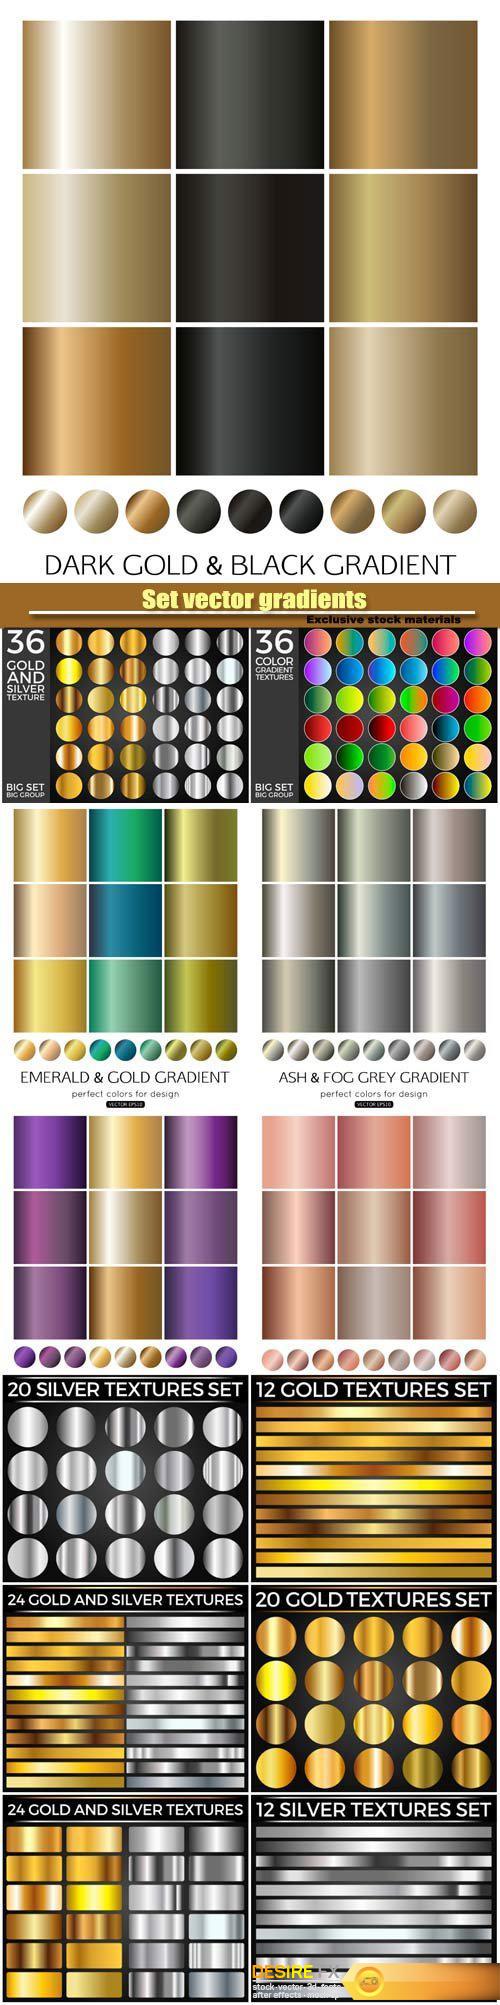 Set vector gradients, gold gradients for fashion background